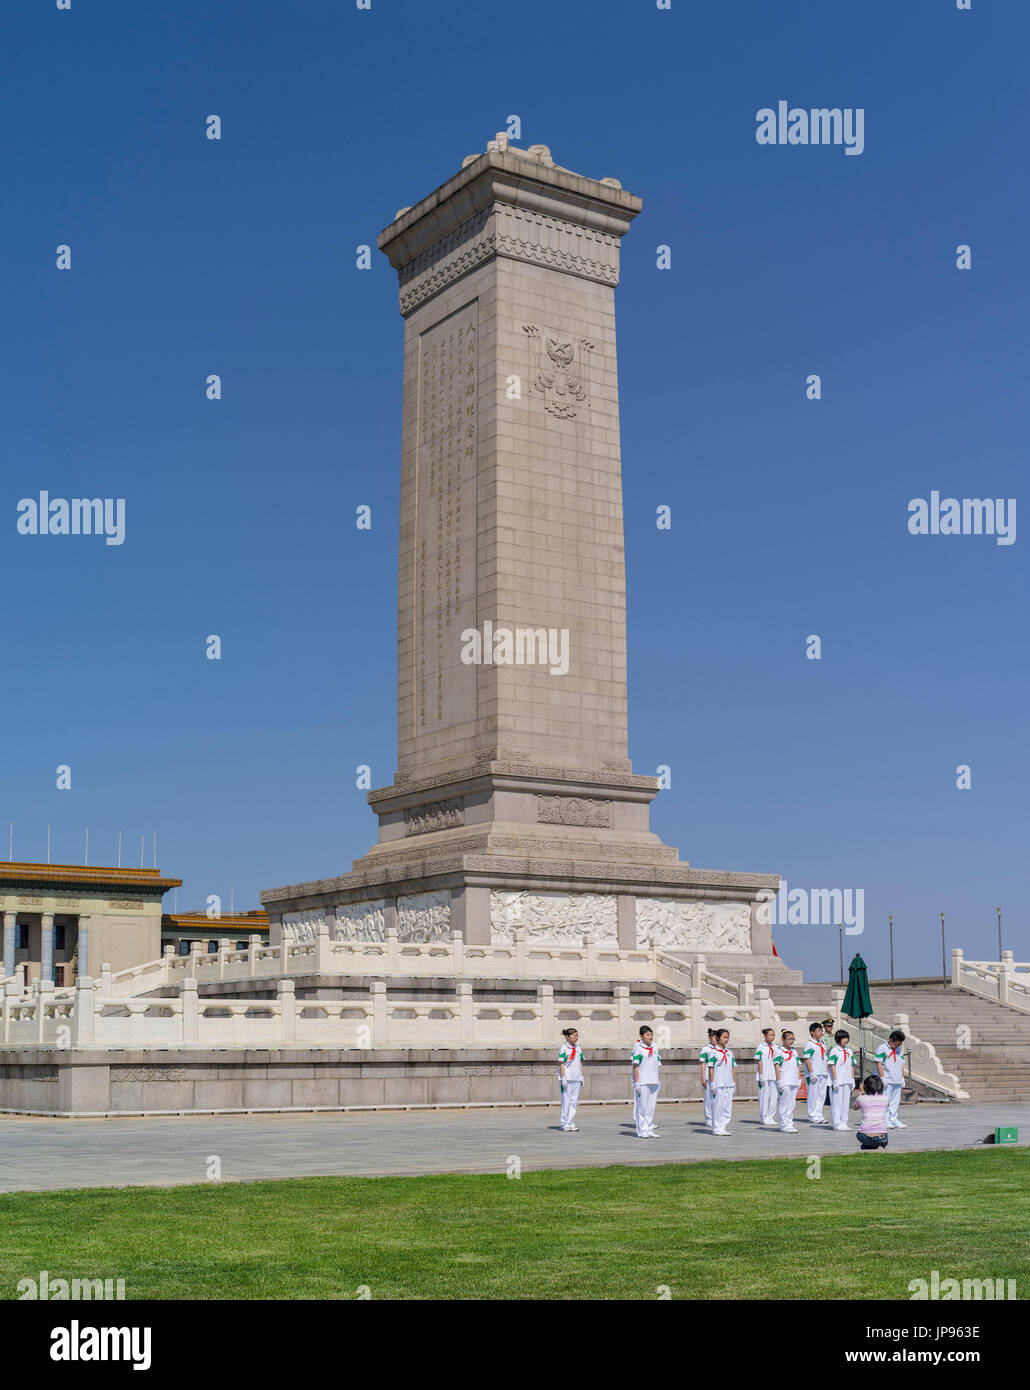 Monument to People's Heroes, Tiananmen Square, Beijing, China Stock Photo